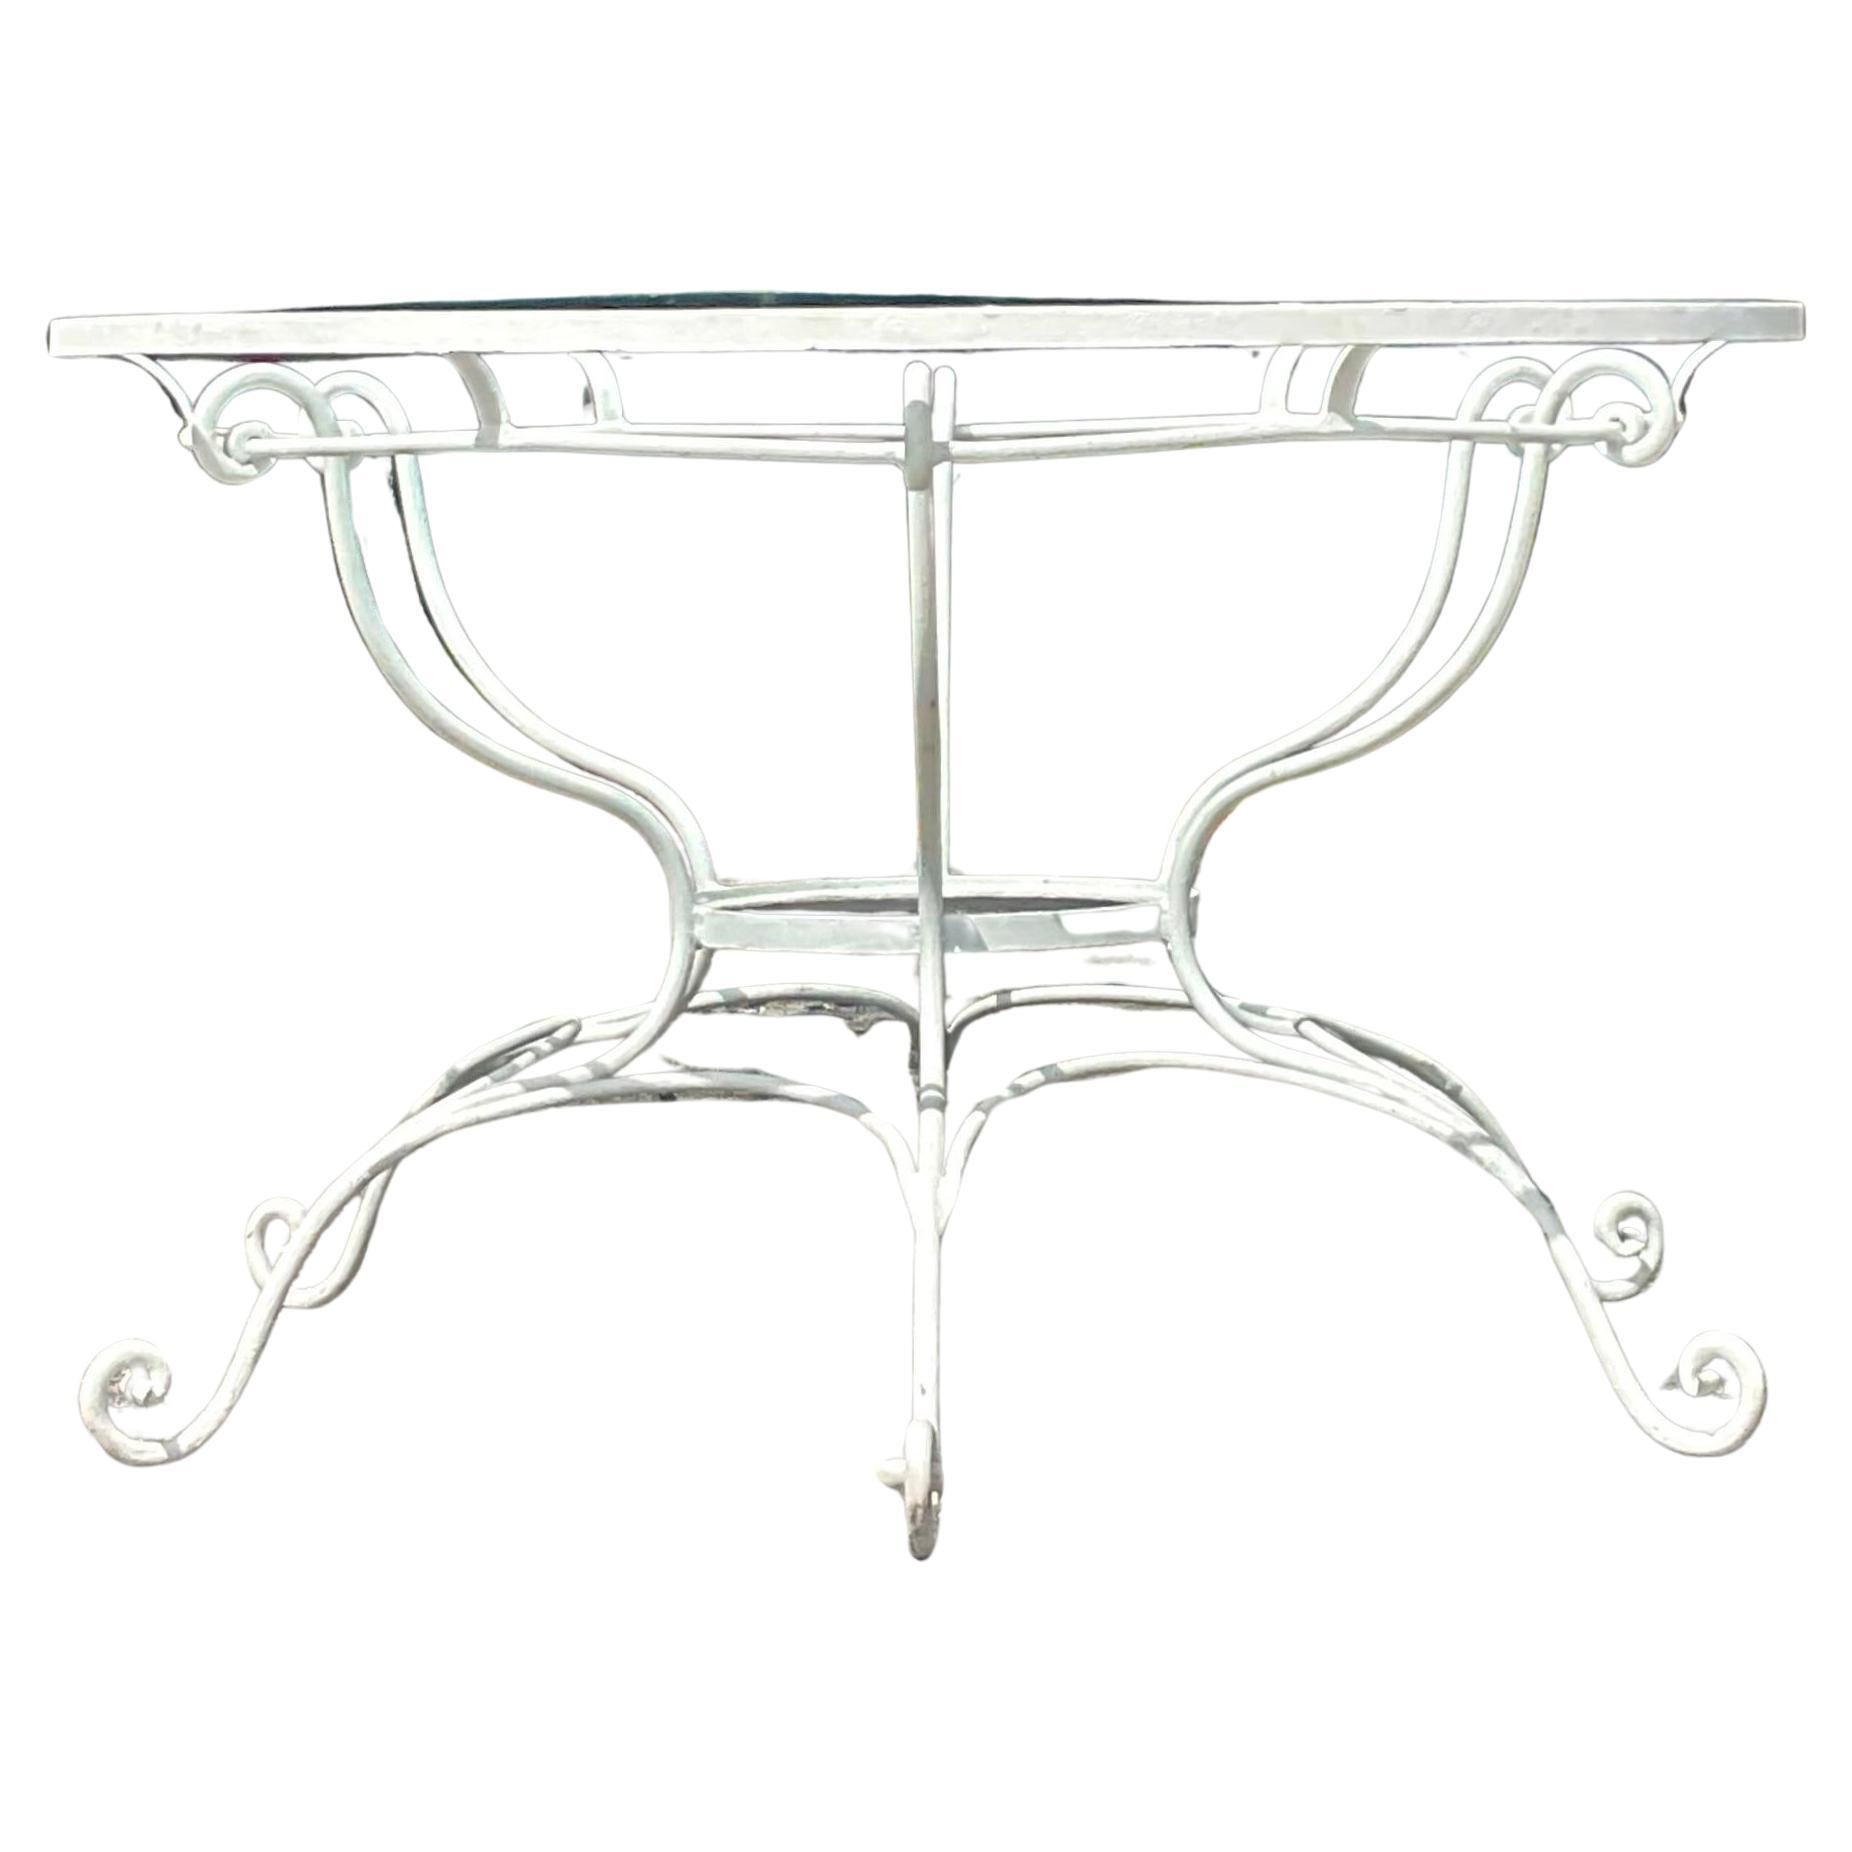 Vintage Coastal Wrought Iron Scroll Dining Table For Sale